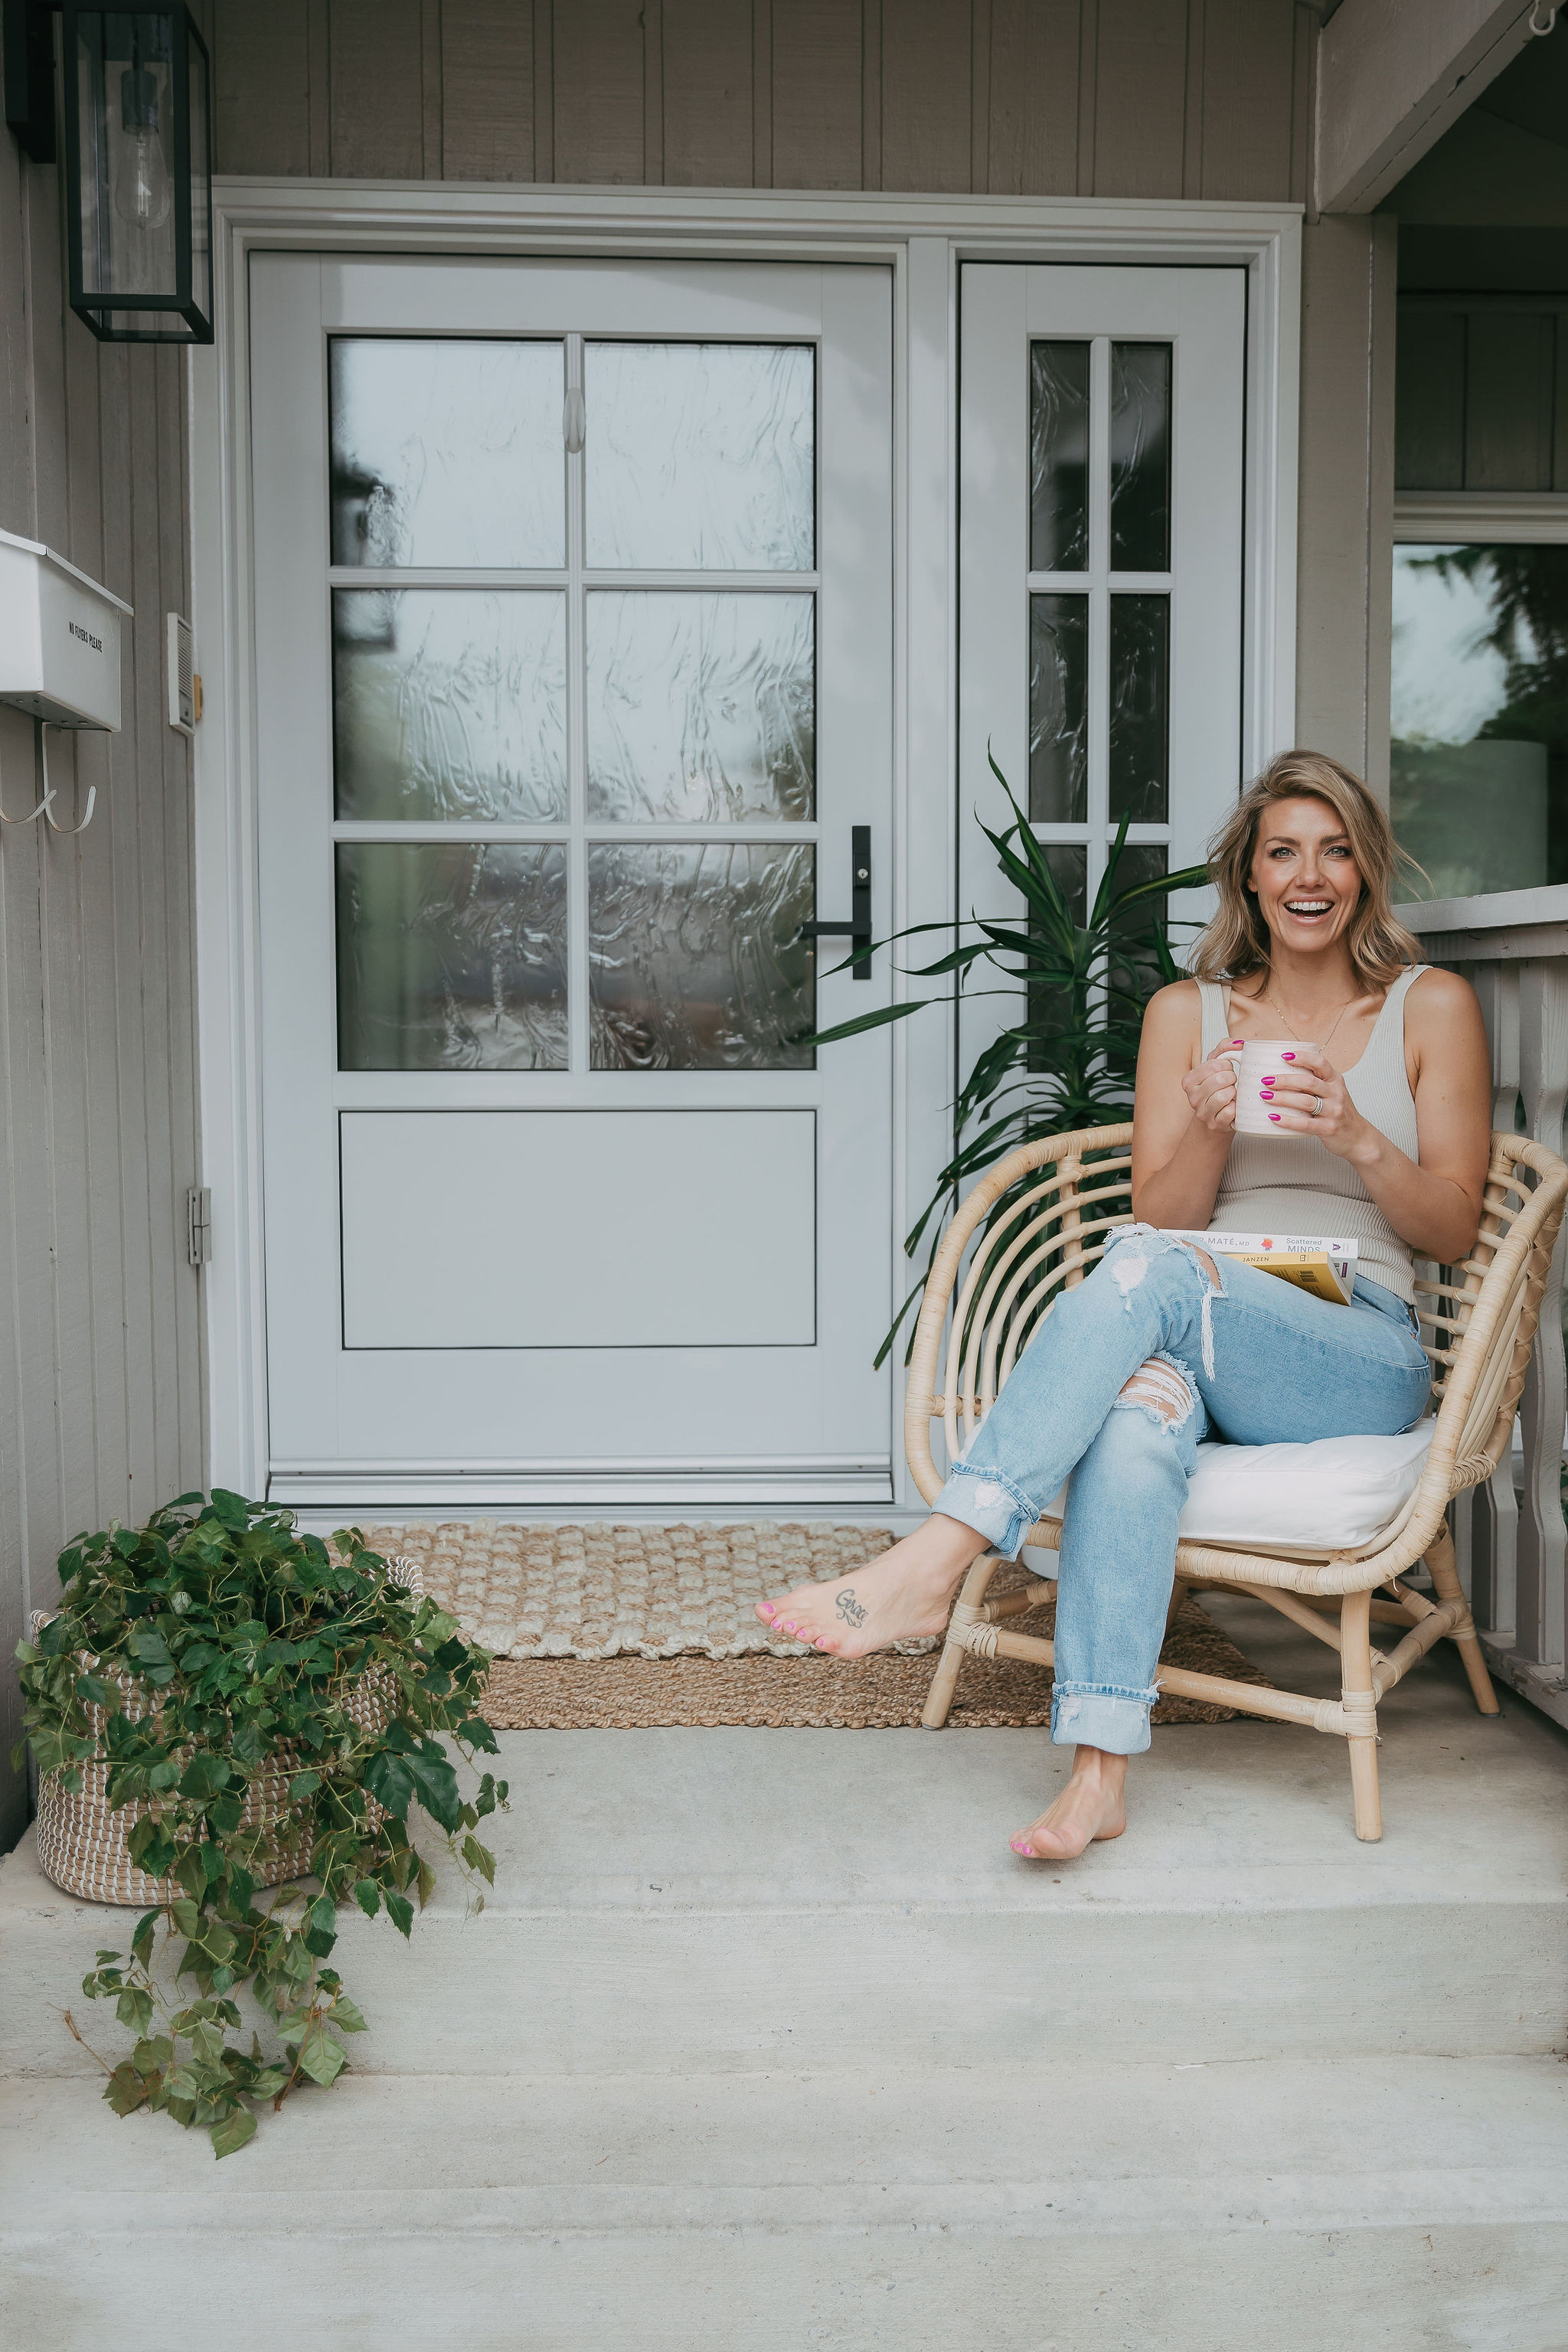 Boho style chair on front porch with Jessica Janzen drinking coffee and fern plant behind her